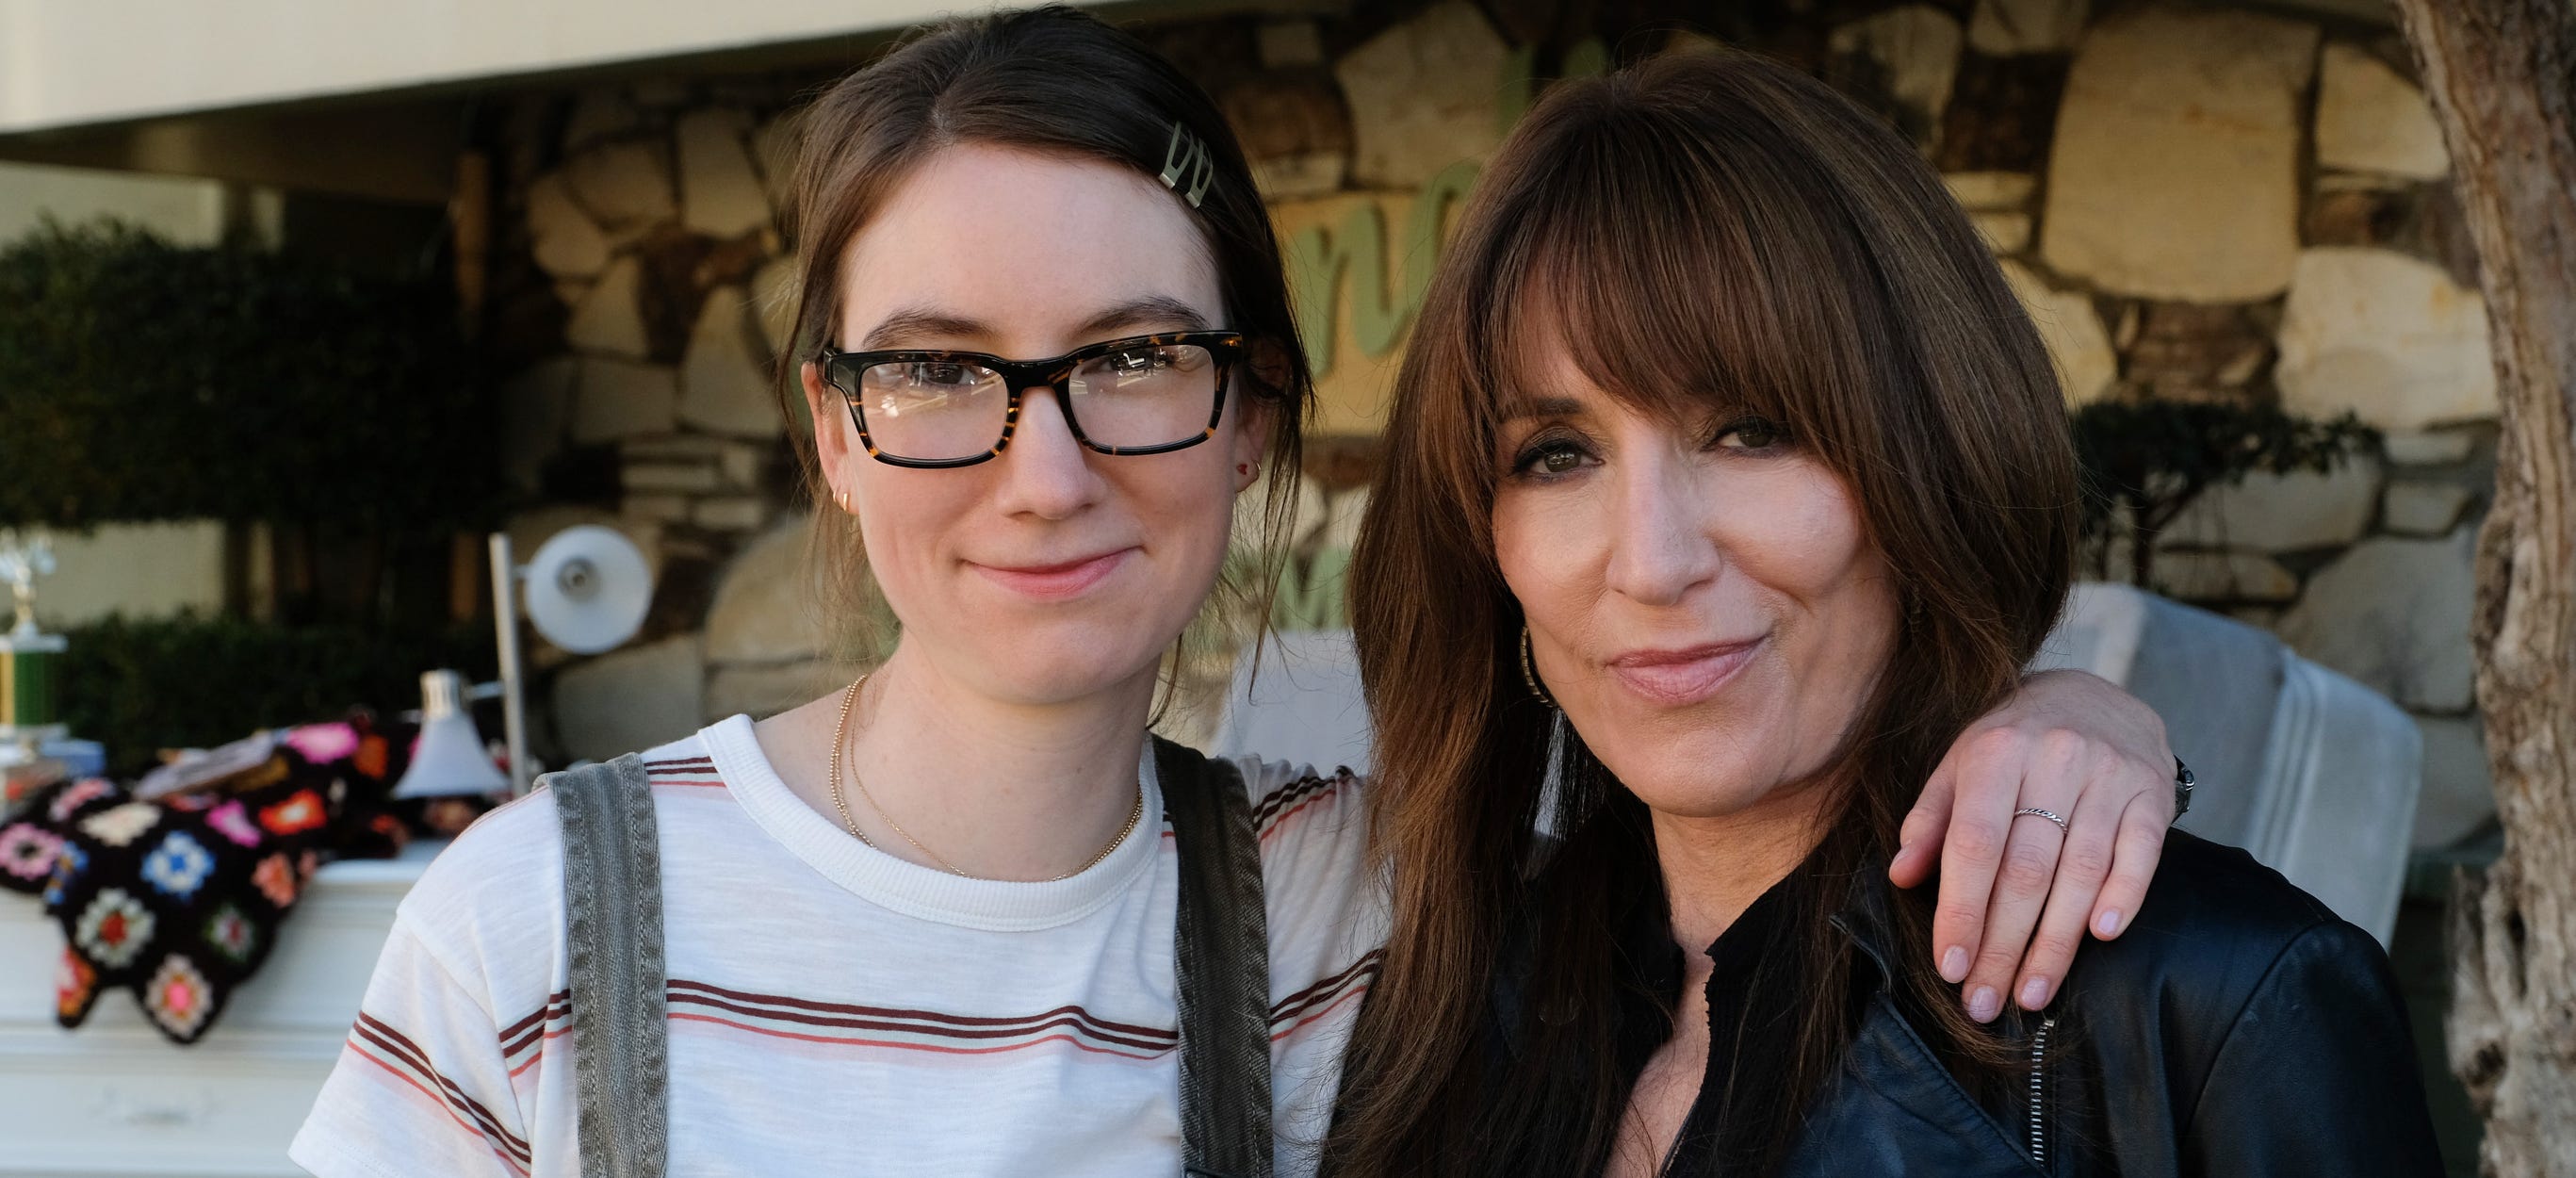 Katey Sagal's Daughter Releases Debut Single, “Annie Lennox Vibes”